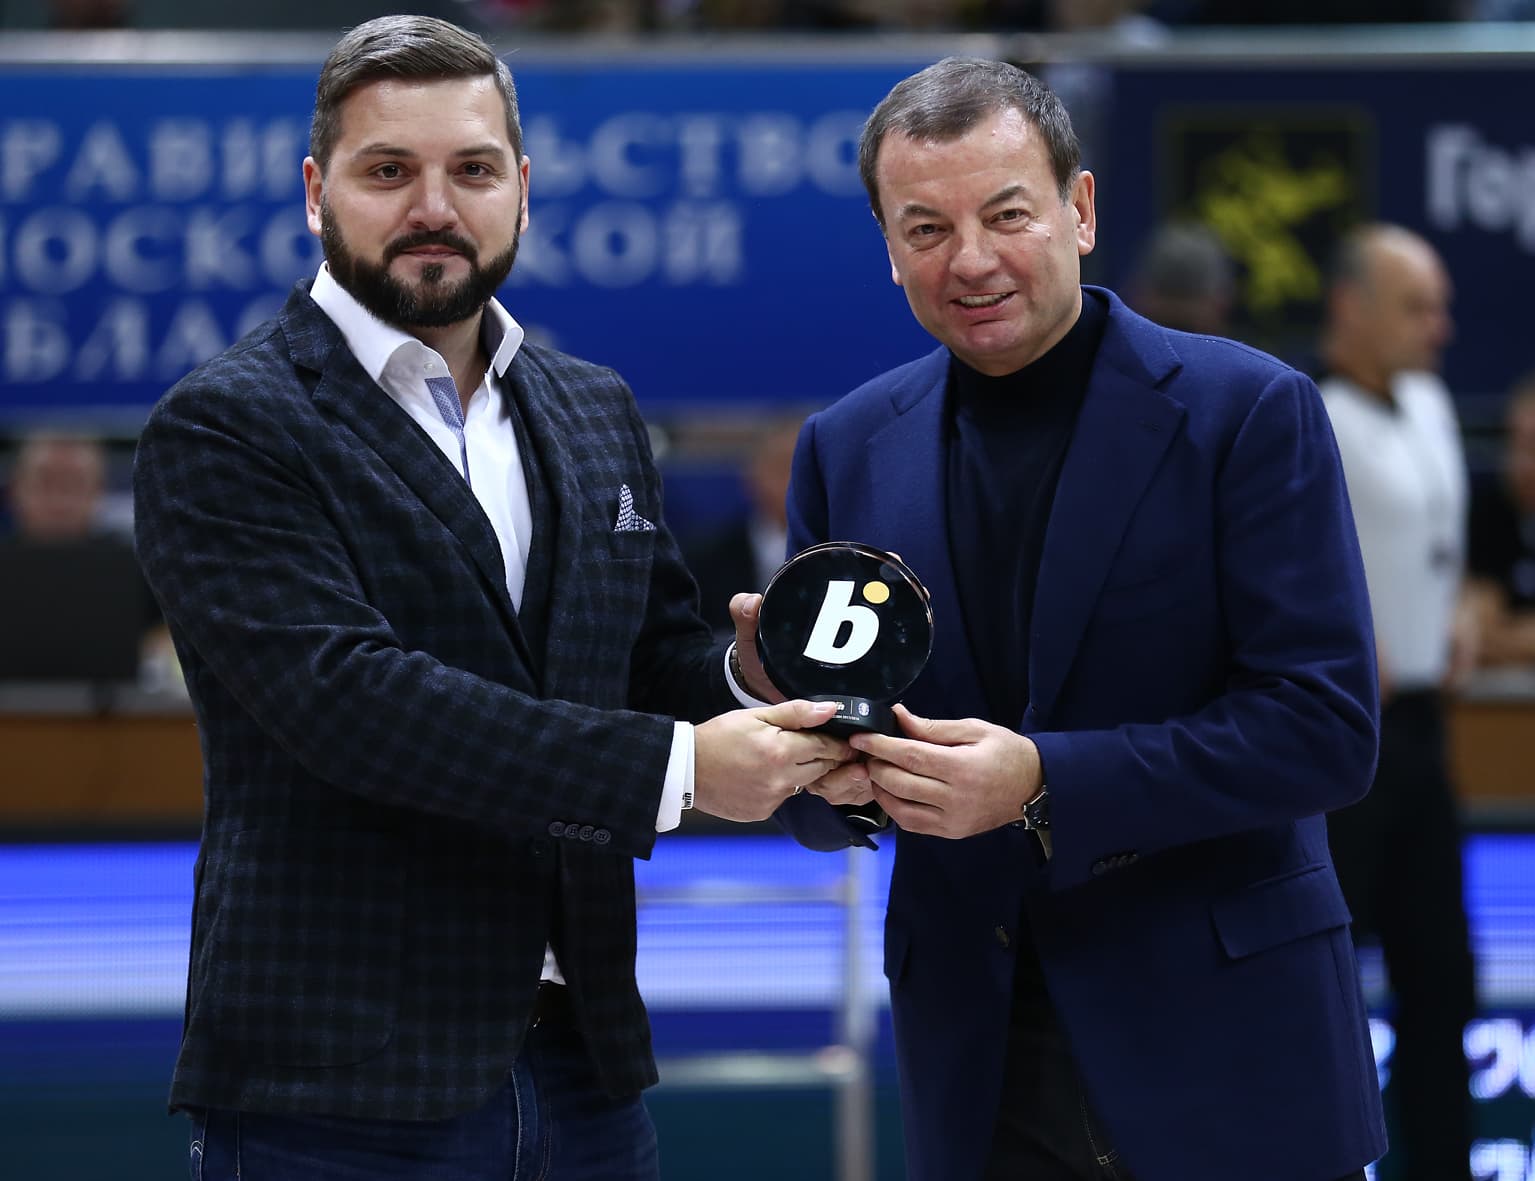 BWIN Russia, VTB United League Announce New Partnership